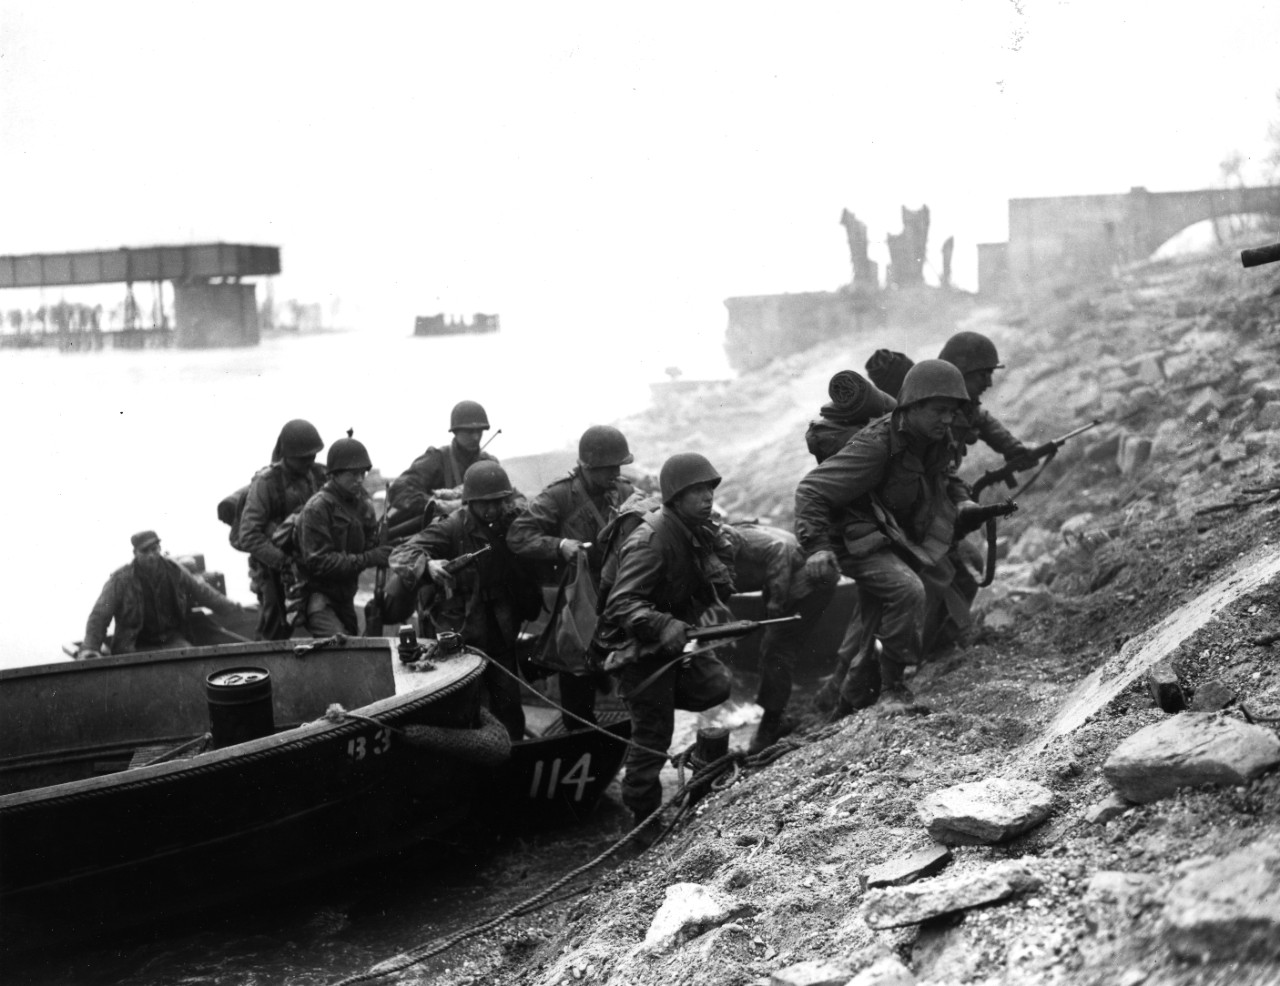 Soldiers of the US Army 7th Infantry Regiment, 3rd Division, leave the assault boat that took them across the Rhine River, 26 March 1945. They climb the river's bank, next to a destroyed bridge in the Frankenthal area. Most of these men are armed with M-1 carbines.